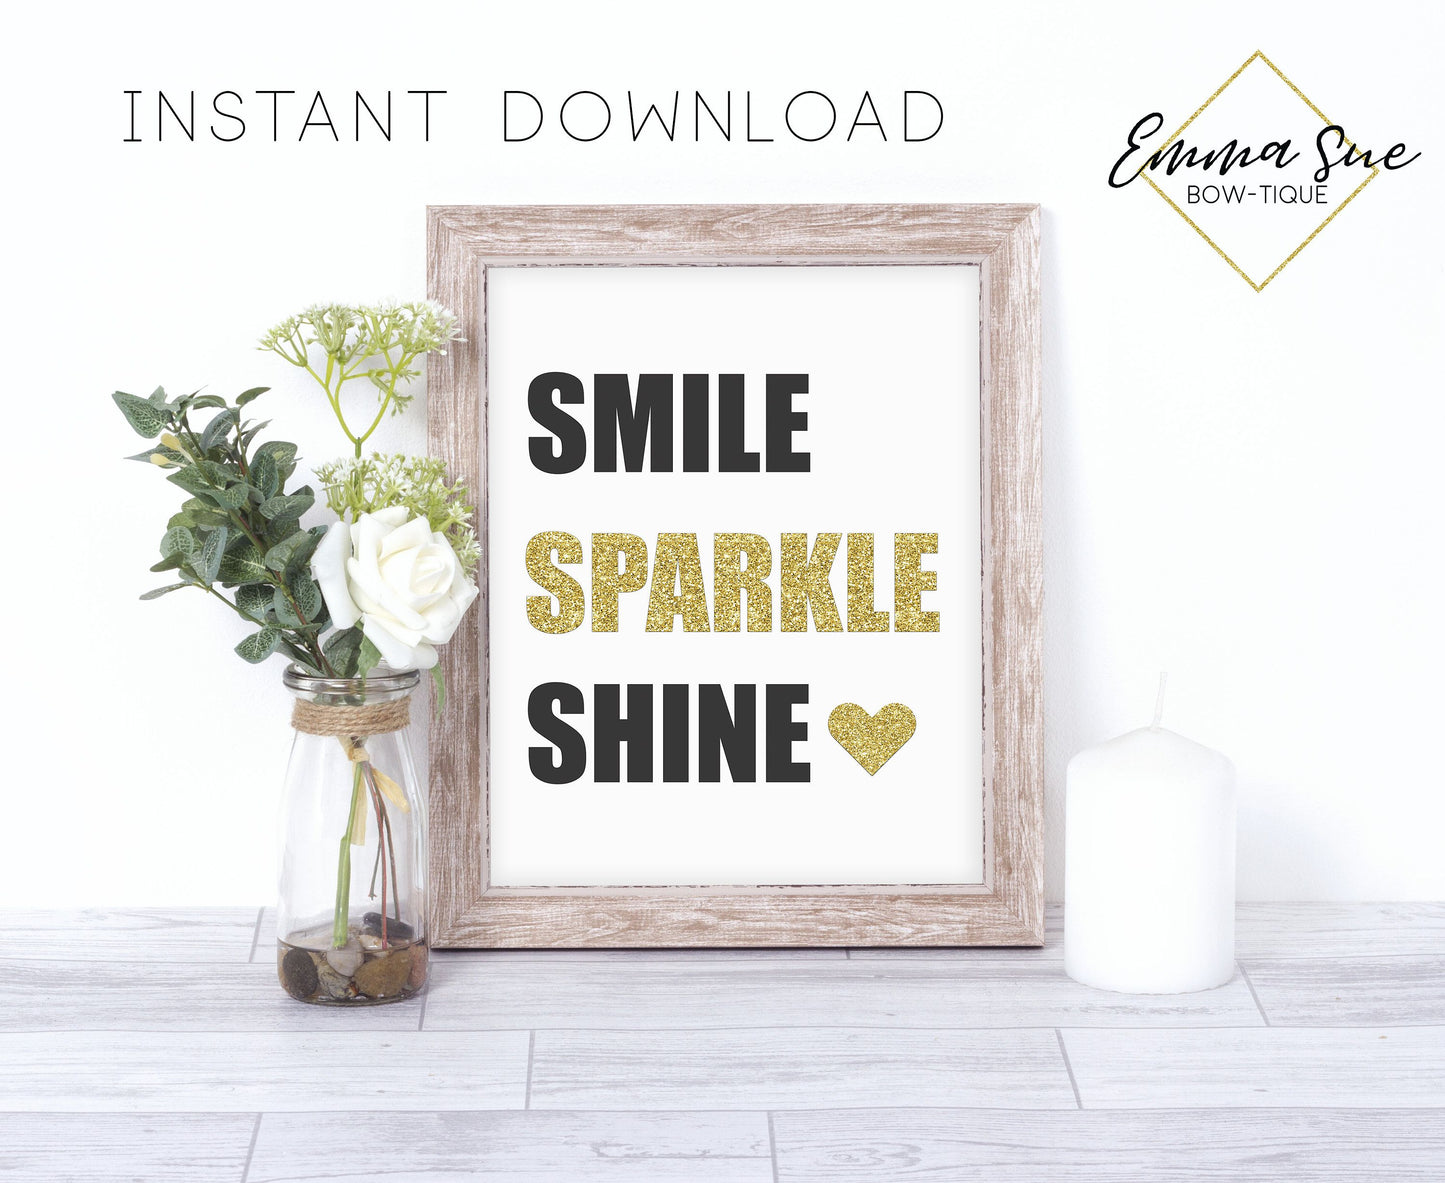 Smile Sparkle Shine - Girl Boss Babe Home Office Motivational Quote Printable Sign Wall Art Digital File